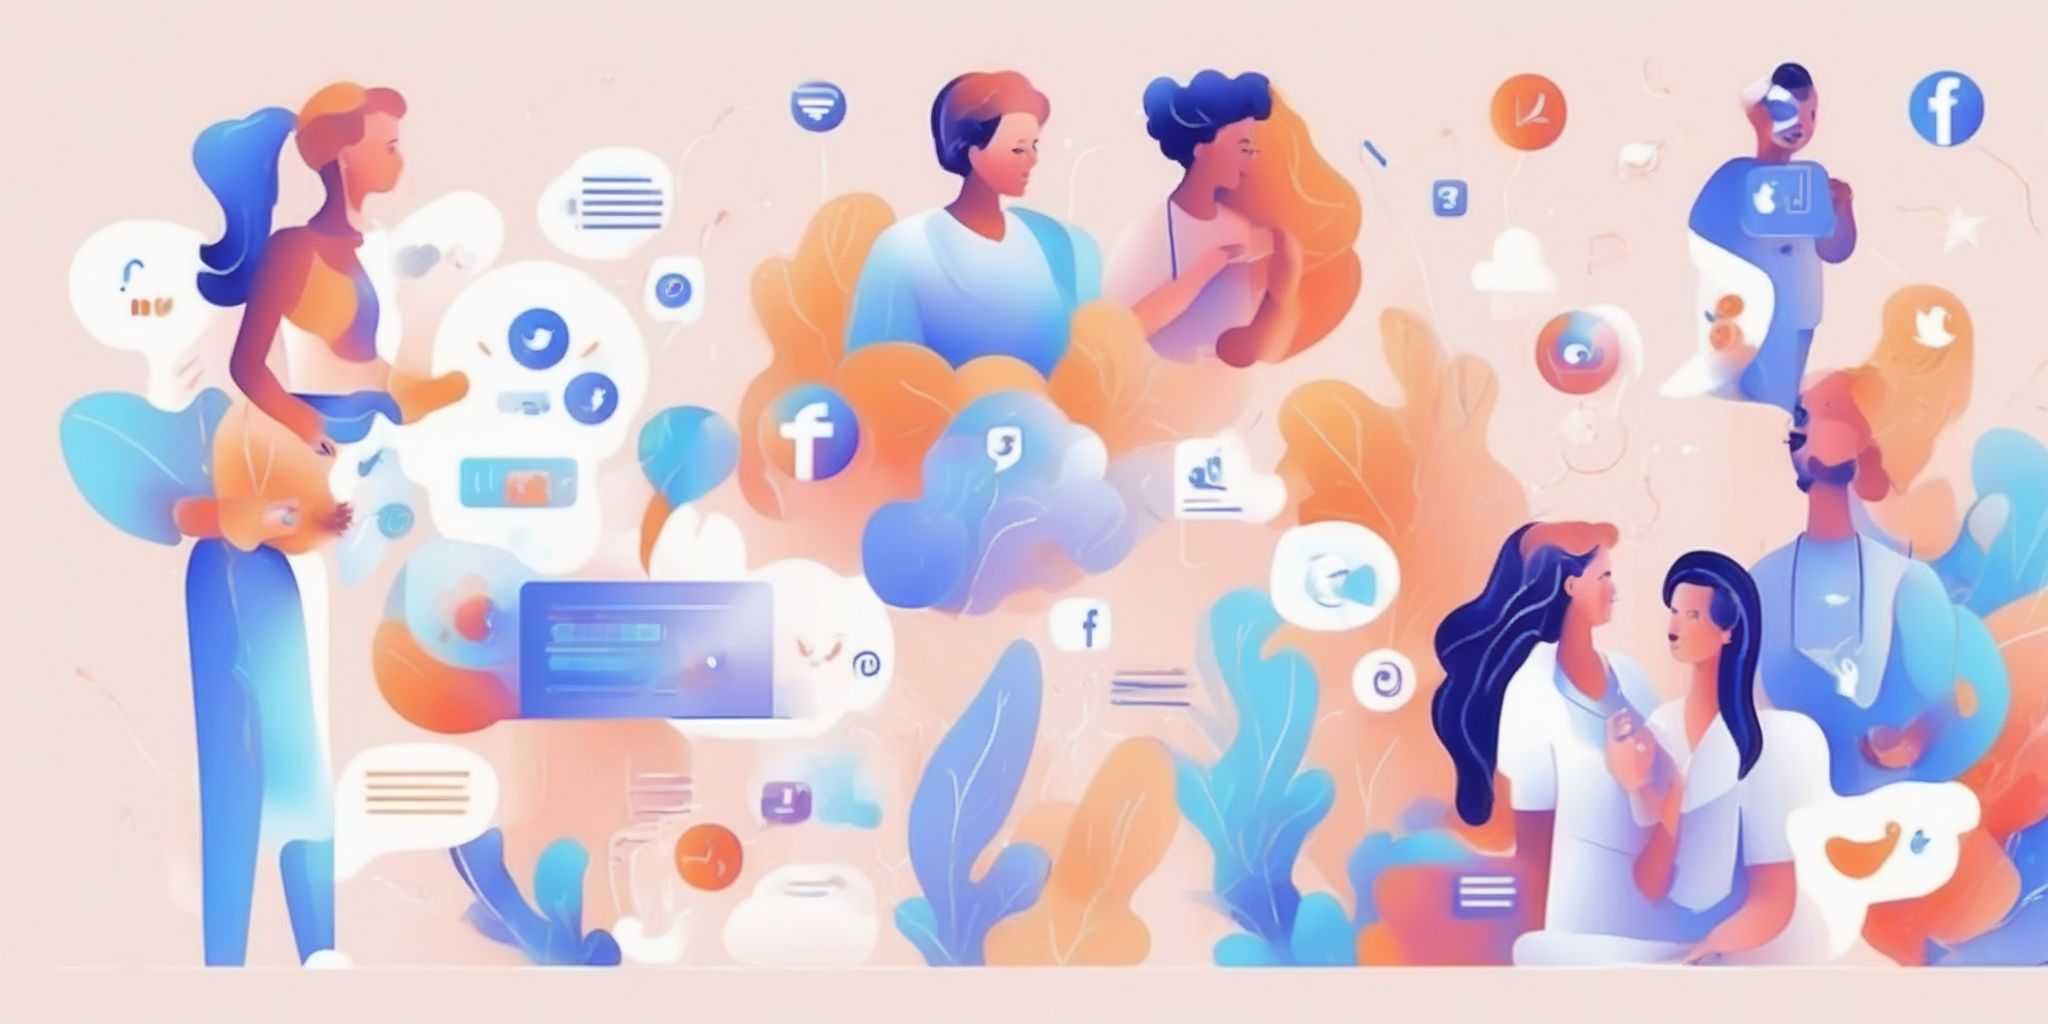 social media engagement in illustration style with gradients and white background